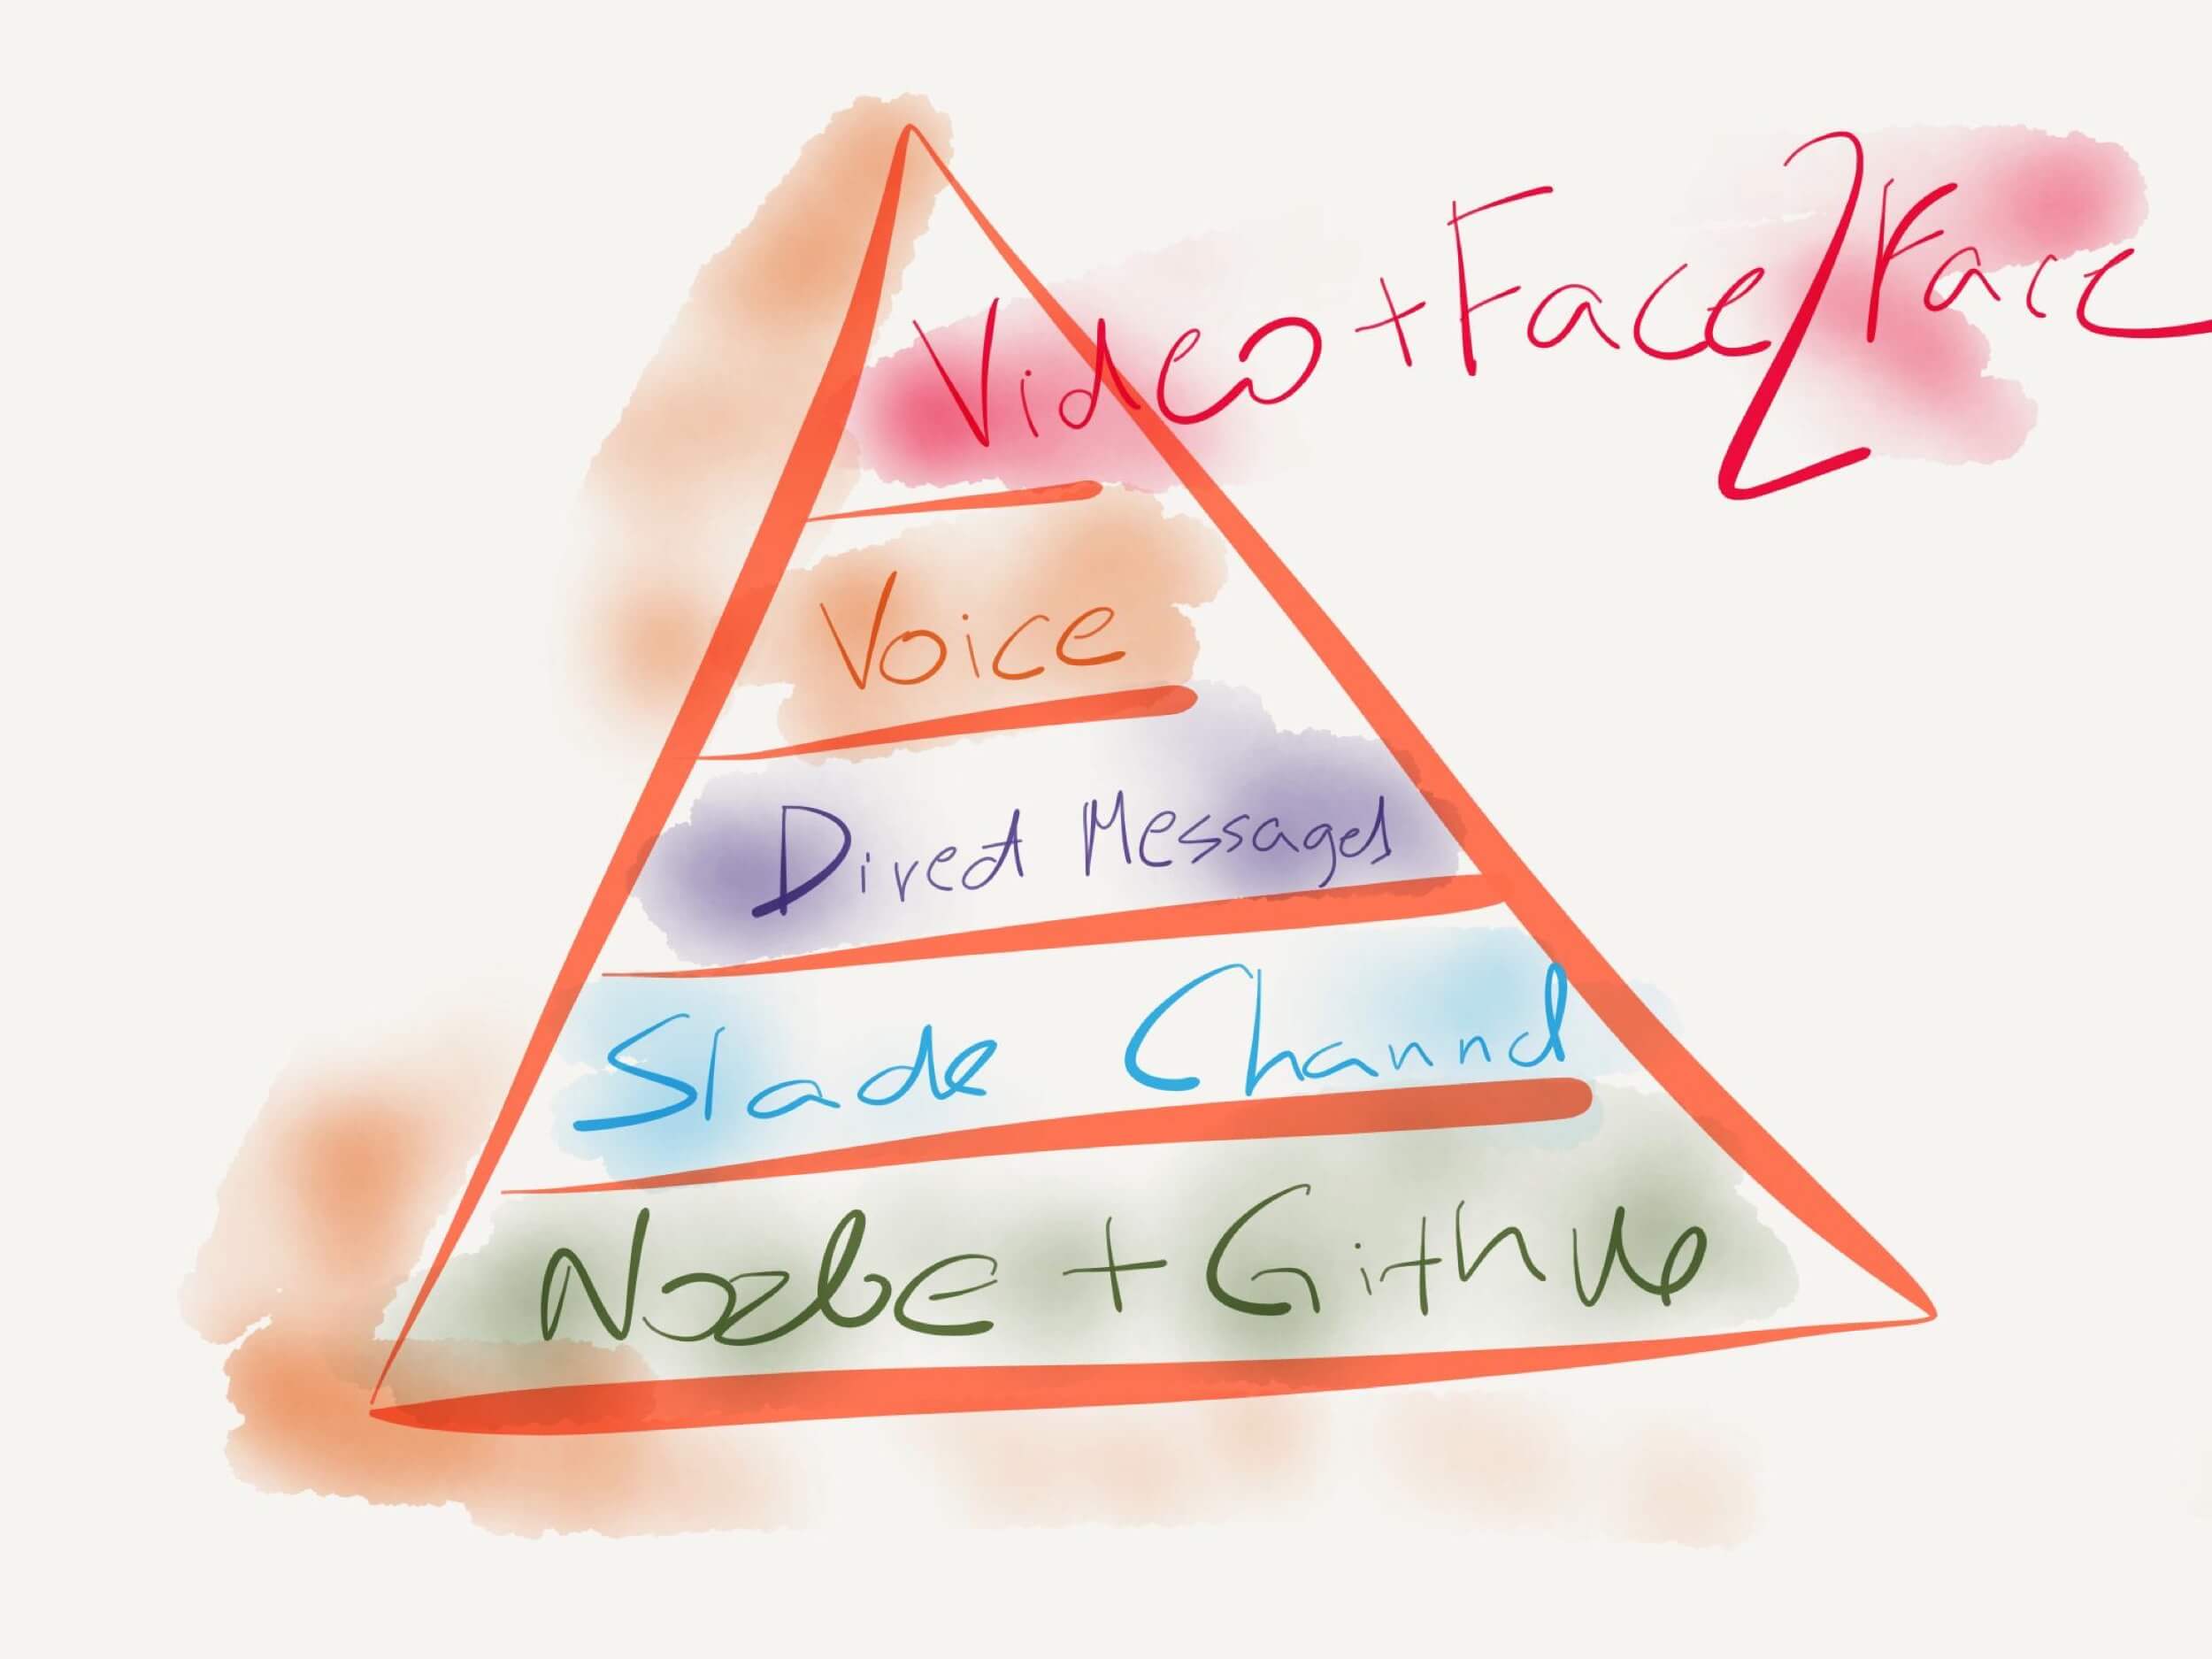 The Pyramid of Communication in a Remotely Working team